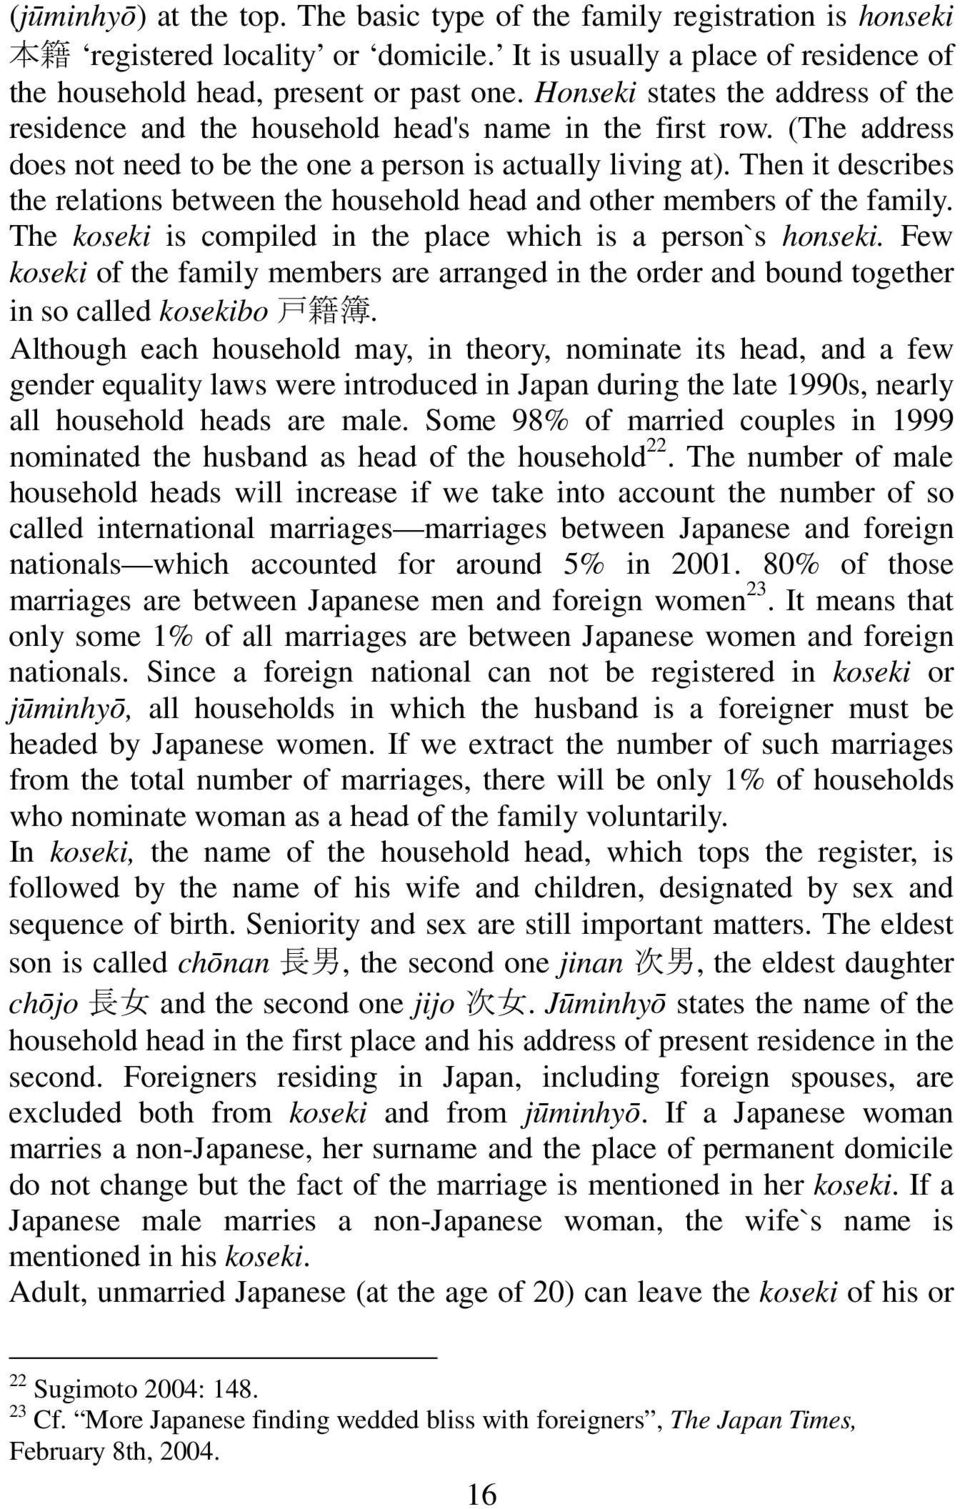 Then it describes the relations between the household head and other members of the family. The koseki is compiled in the place which is a person`s honseki.